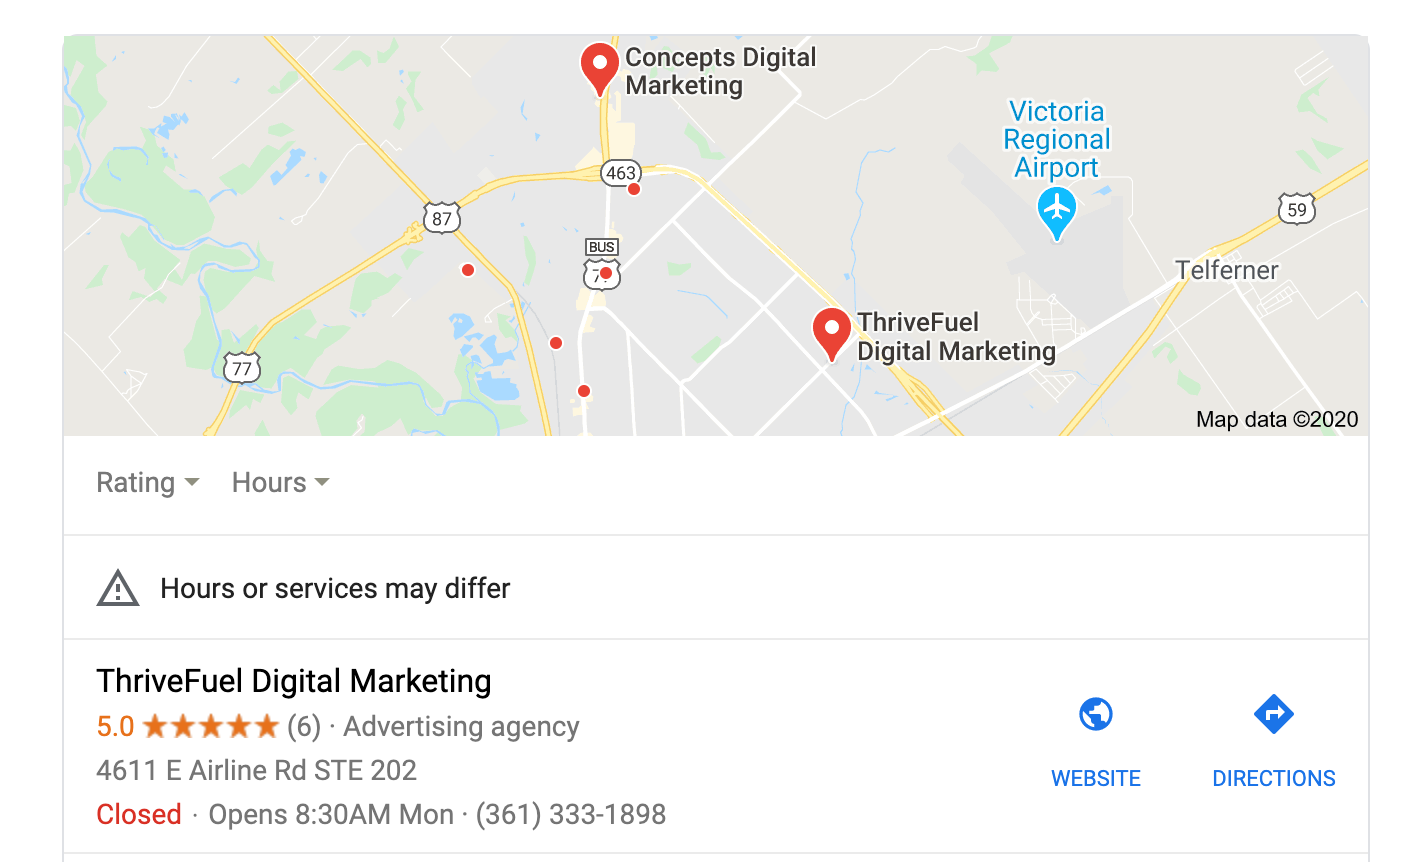 Google My Business Optimization: The most critical component of your digital presence?